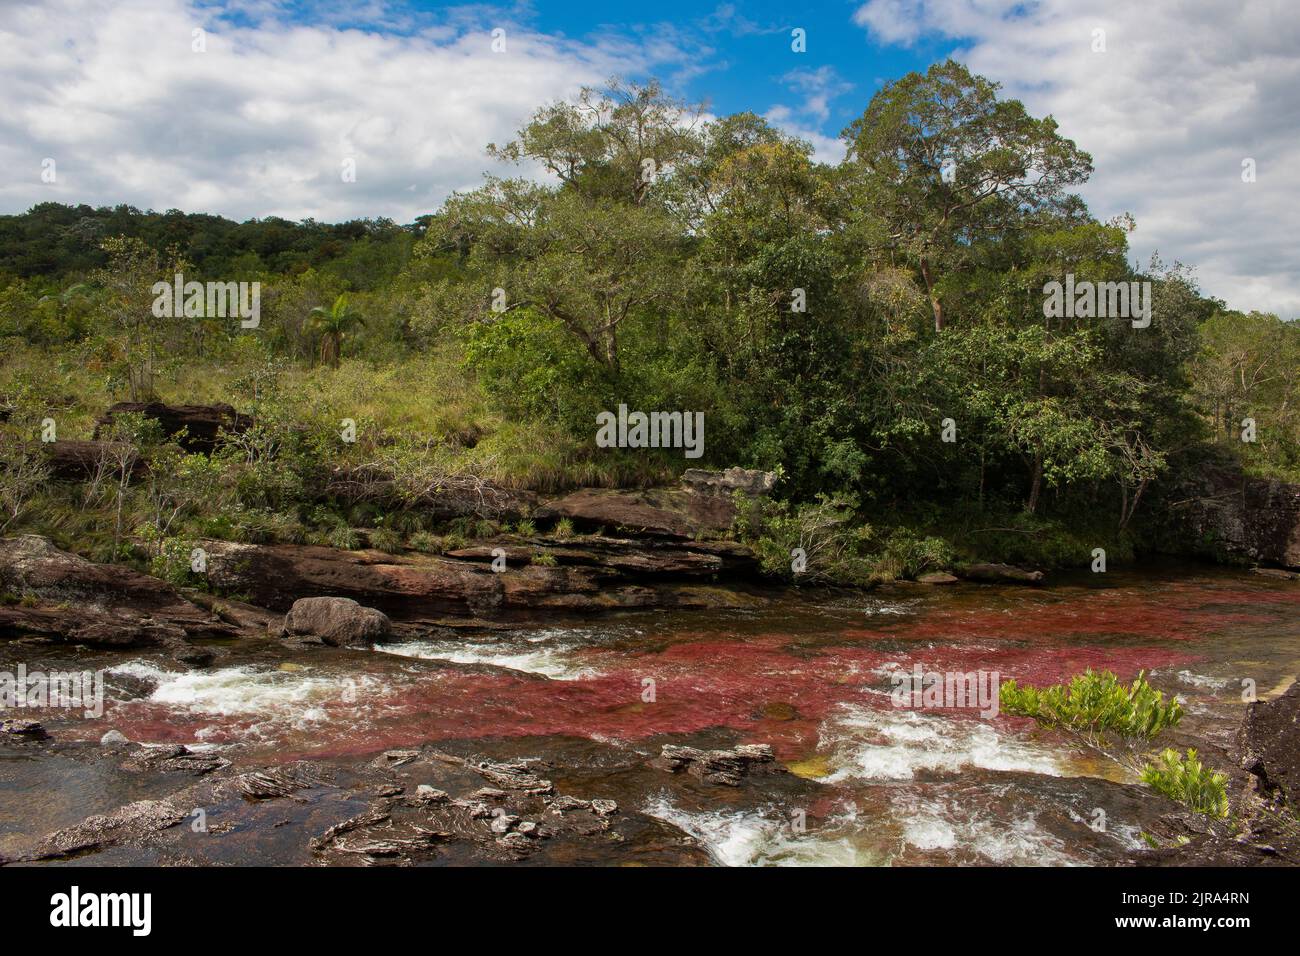 A view of the Cano Cristales, known as the Rainbow River, in the Serrania de La Macarena National Park in Colombia Stock Photo